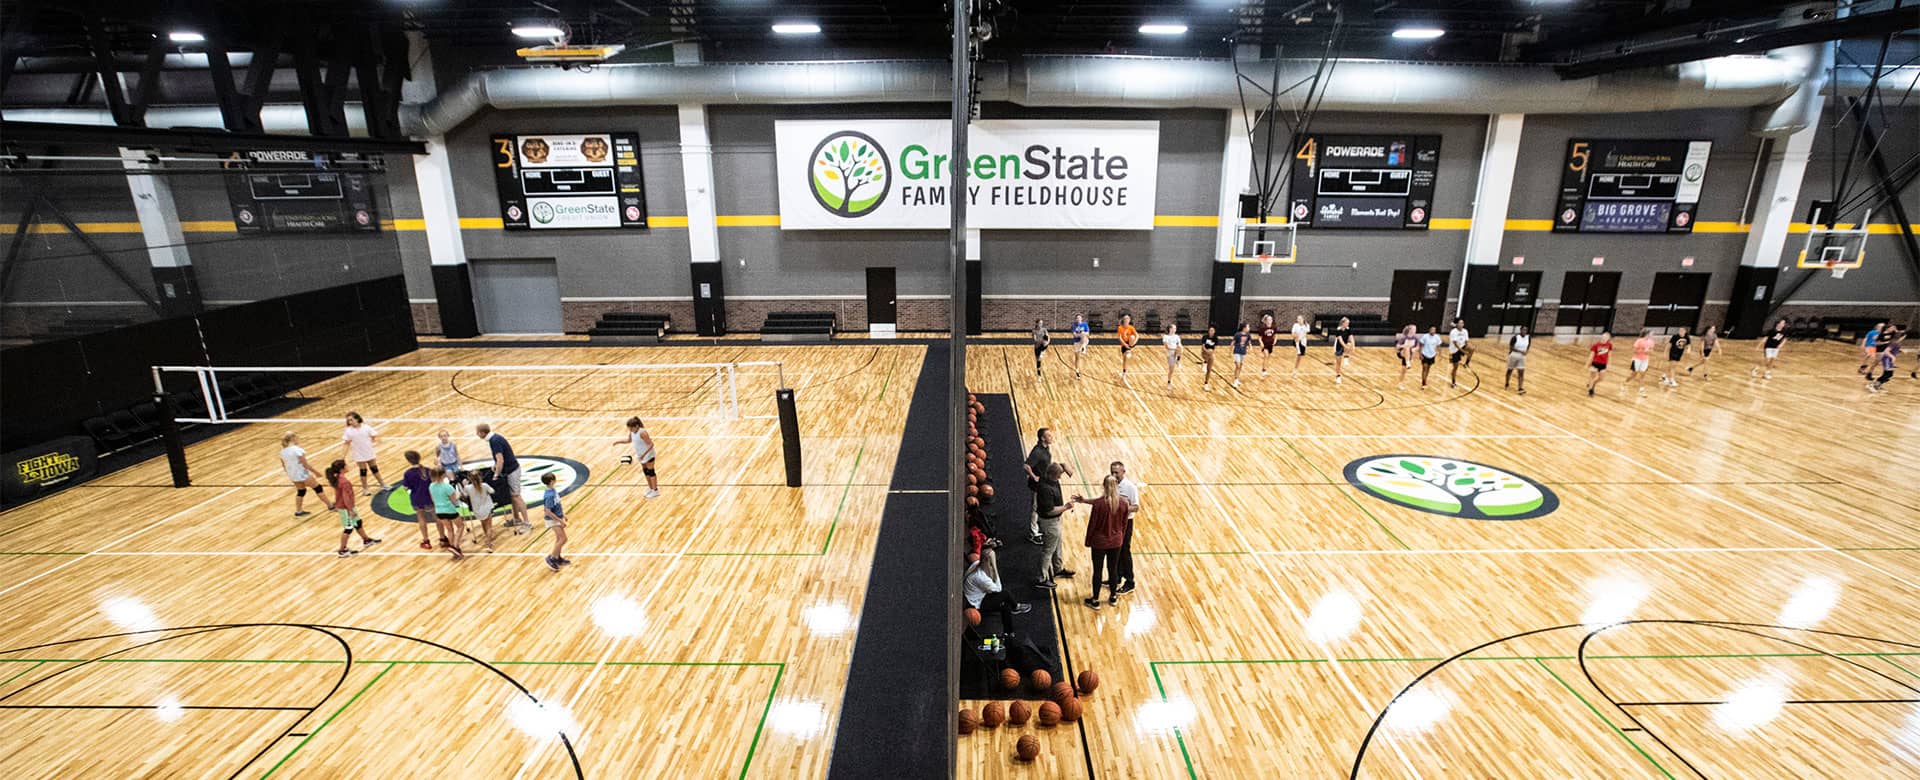 Xtream Arena and GreenState Family Fieldhouse